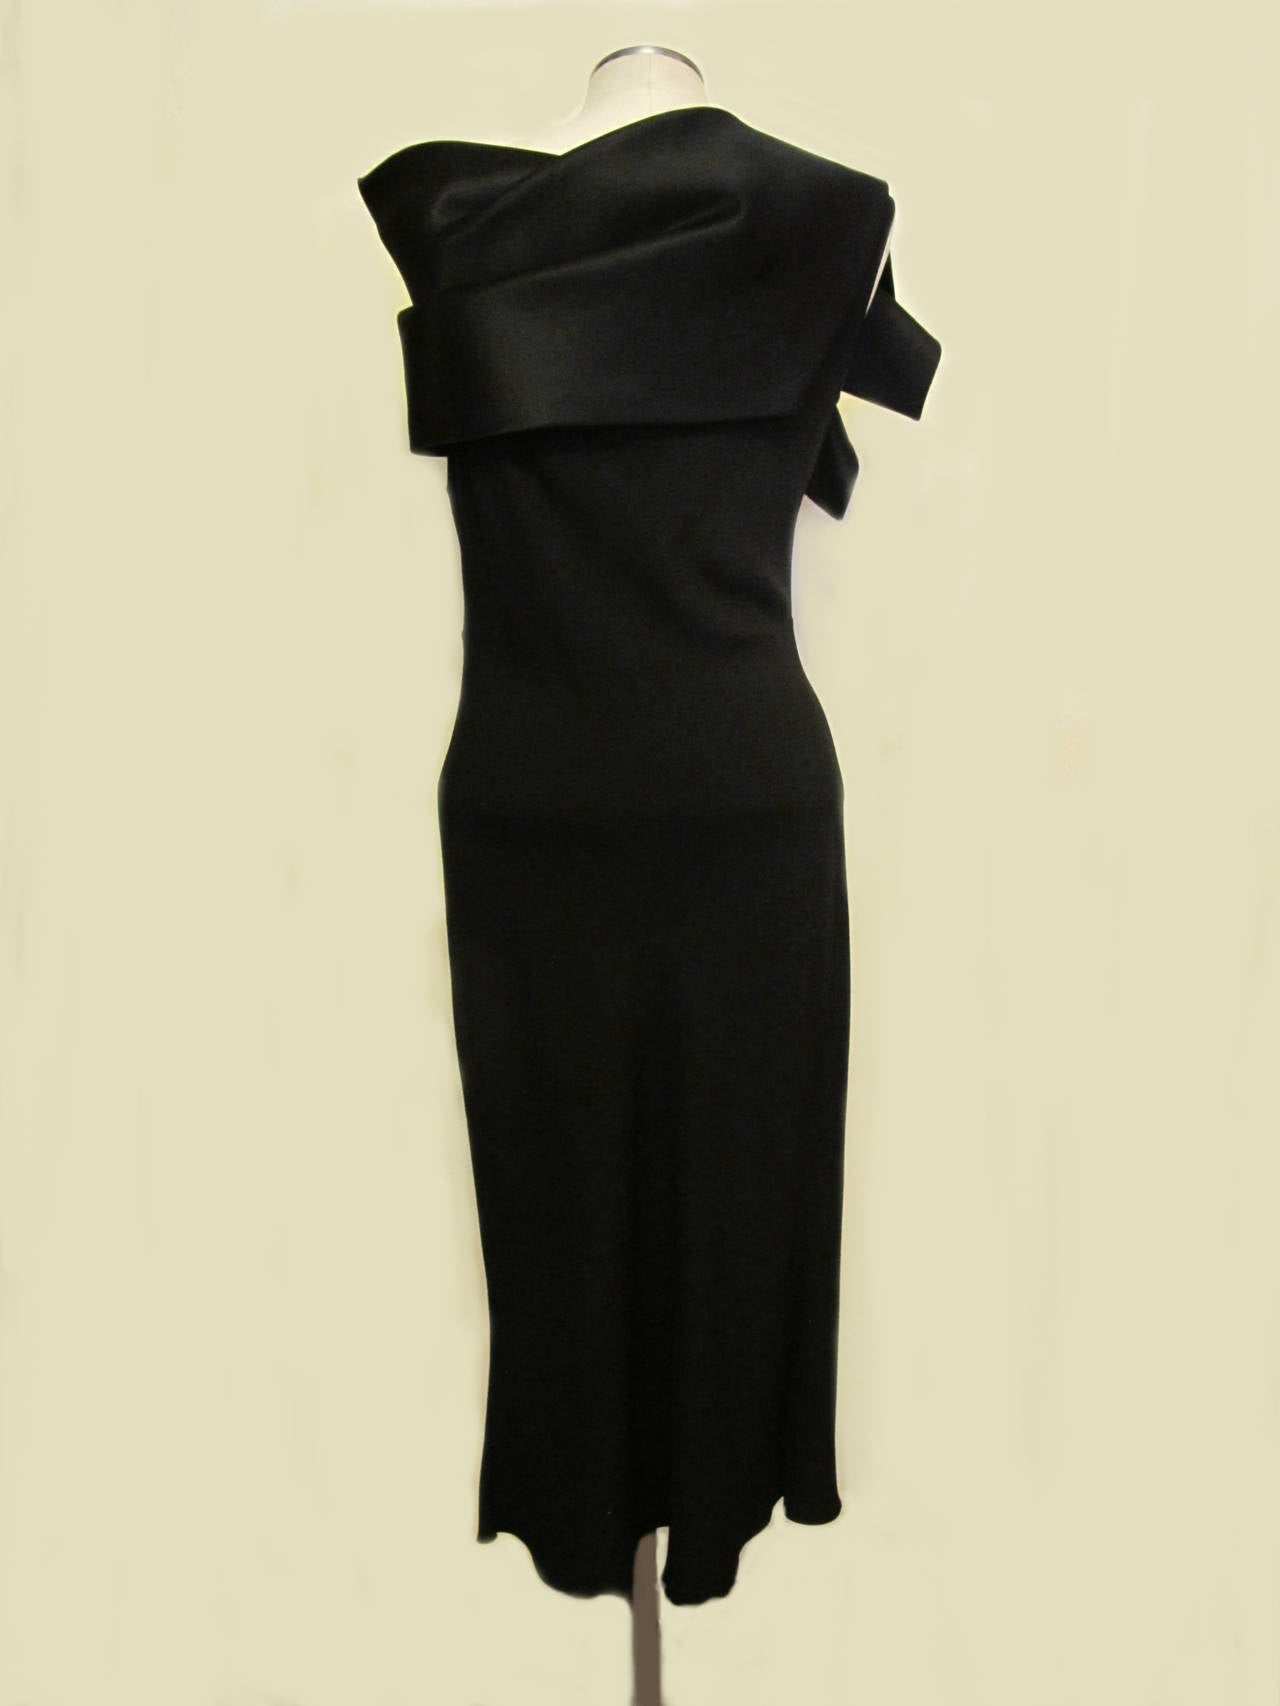 2009 John Galliano Paris Asymmetrical Black Cocktail Dress In Excellent Condition For Sale In San Francisco, CA